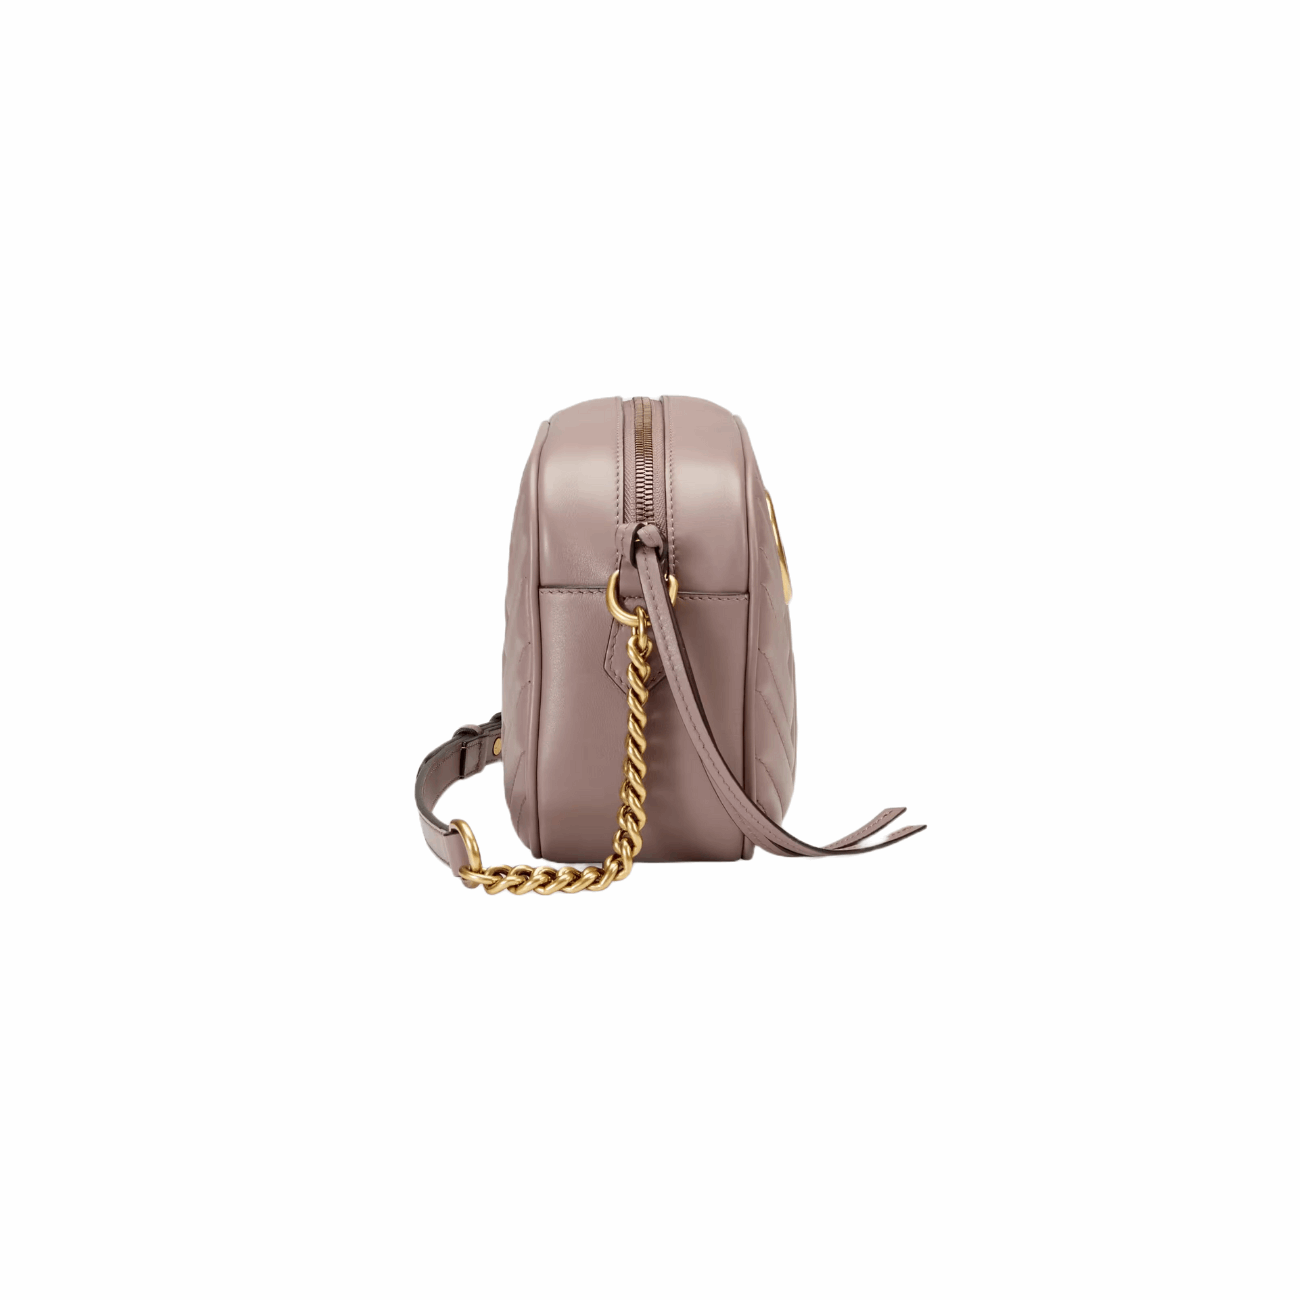 Gucci 447632 DTD1D 5729 GG Marmont Small Shoulder Bag, Dusty Pink